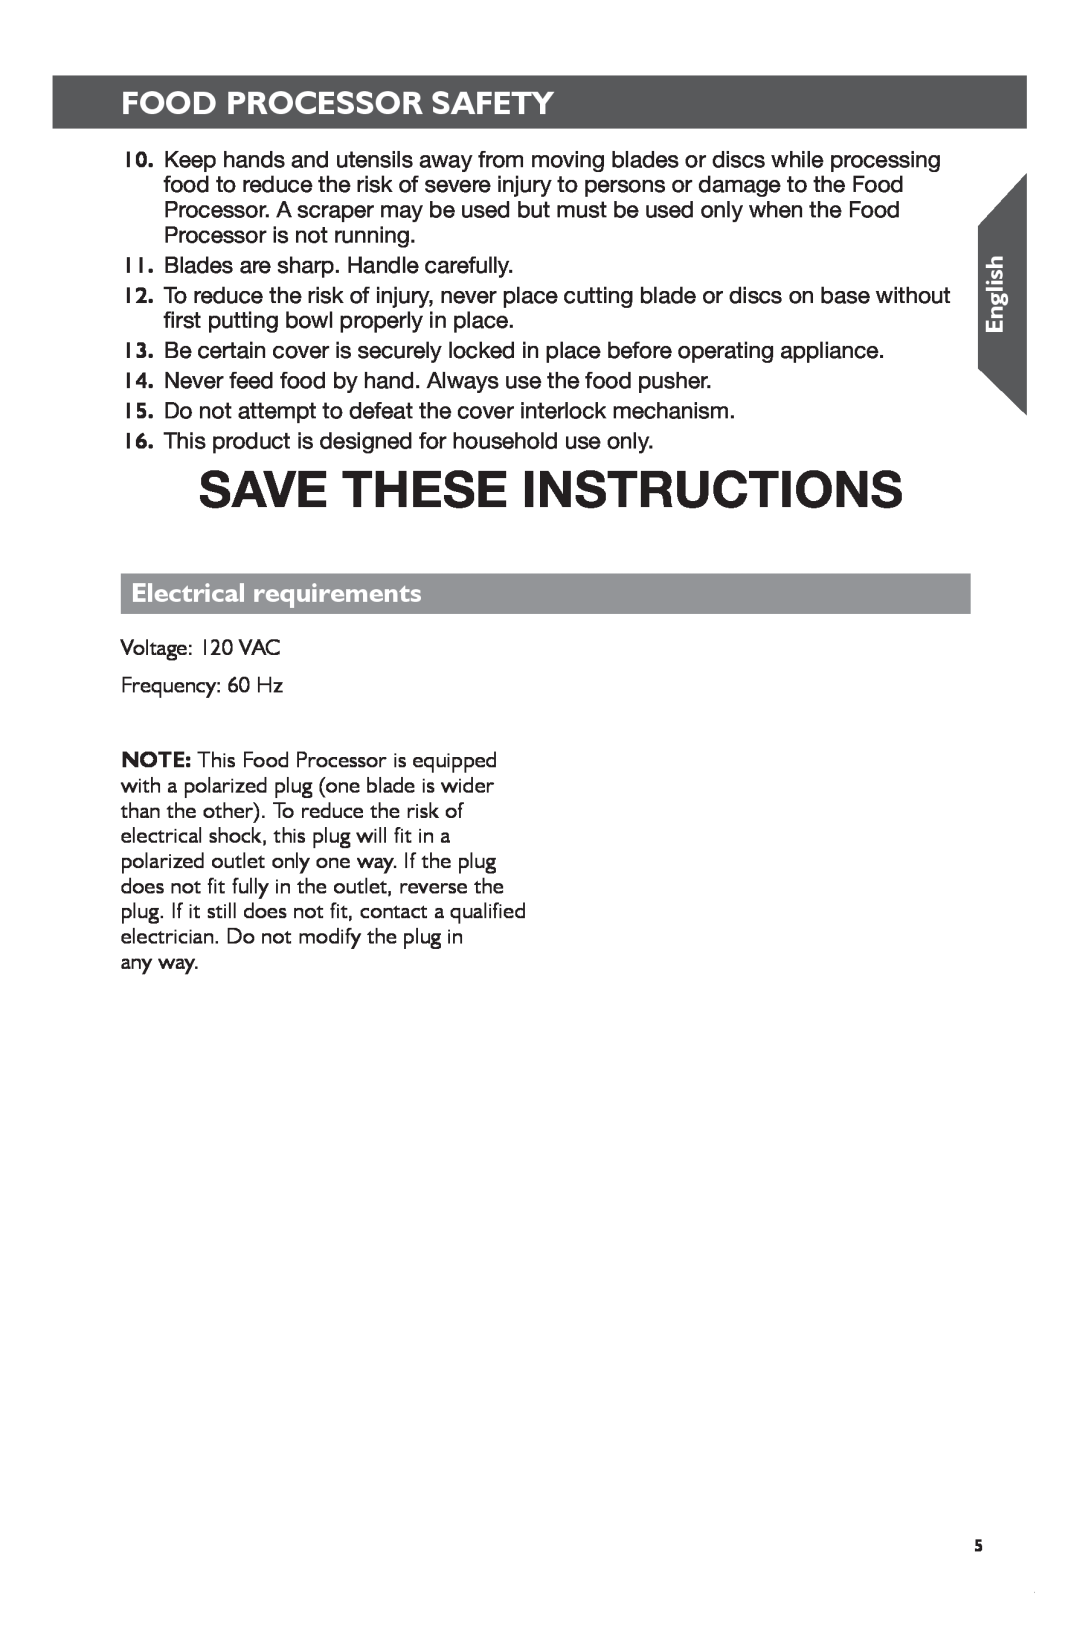 KitchenAid KFP1133 Save These Instructions, Electrical requirements, Foodcmd +Processorshift Clicksafetyto Change Copy 